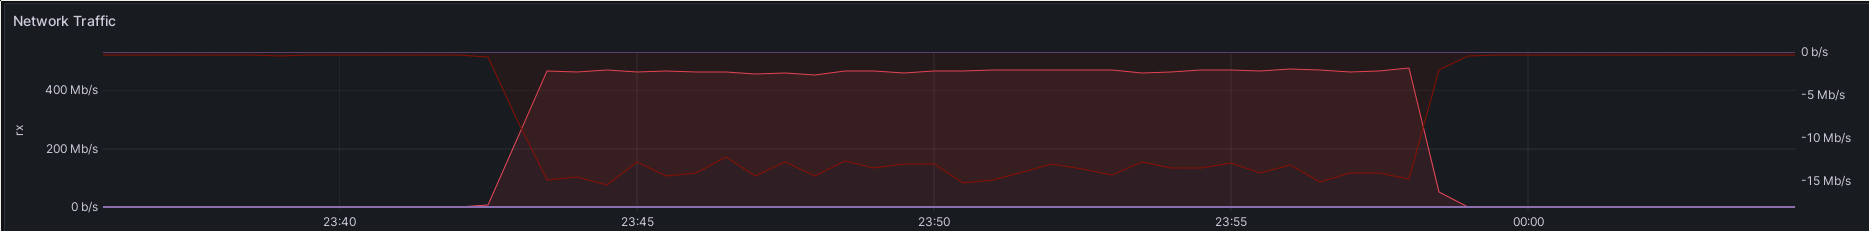 A screenshot of a Grafana visualization. On the x axis is time, and on the y axis is traffic in Mbit/s. For about 15 minutes, rx traffic of about 450Mbit/s can be seen.